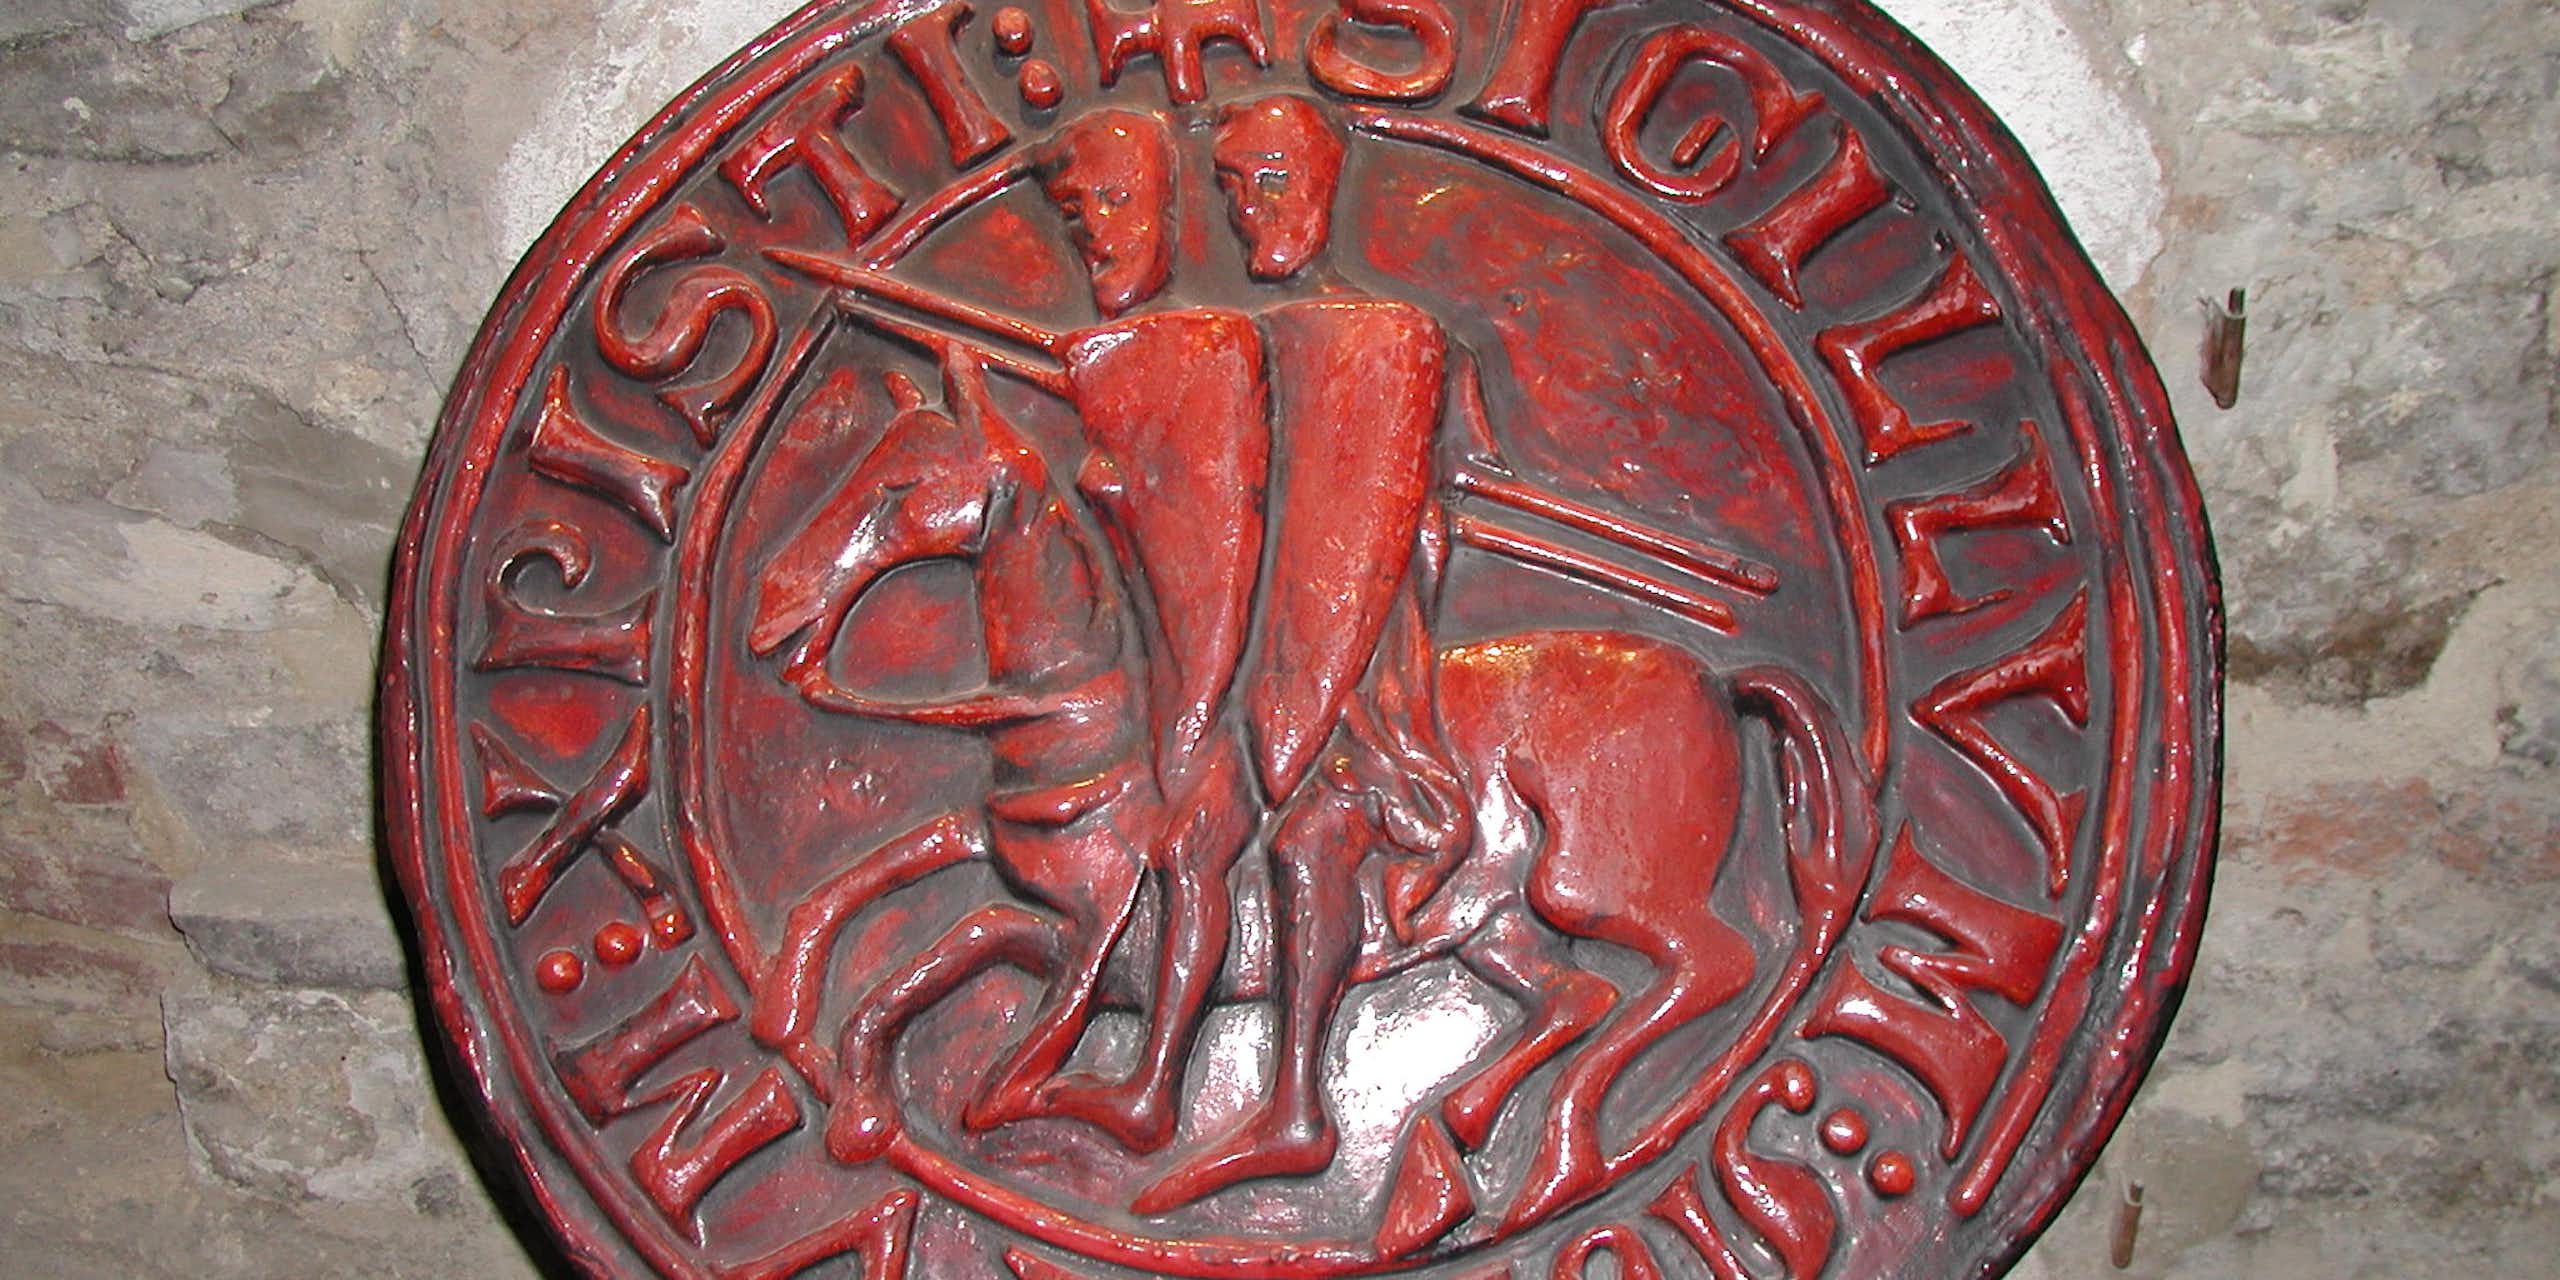 Circular, red seal depicting two knights sitting on one horse